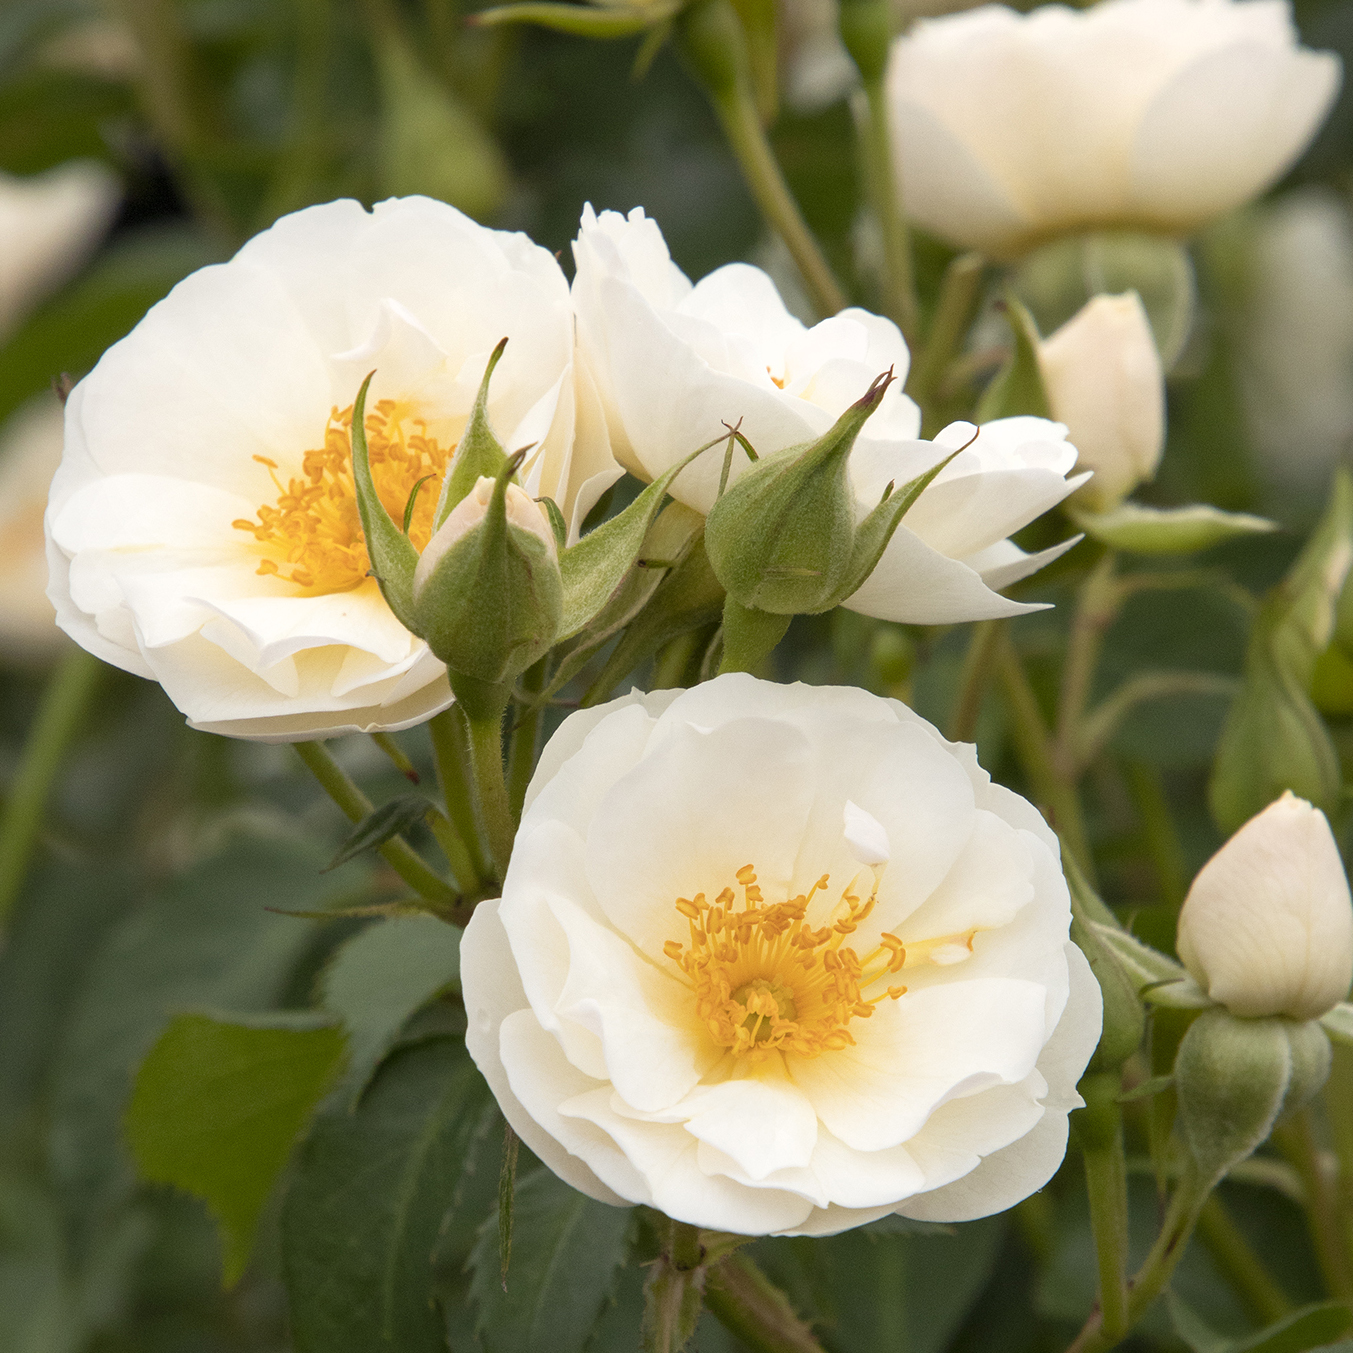 white rose flowers with yellow center and green leaves